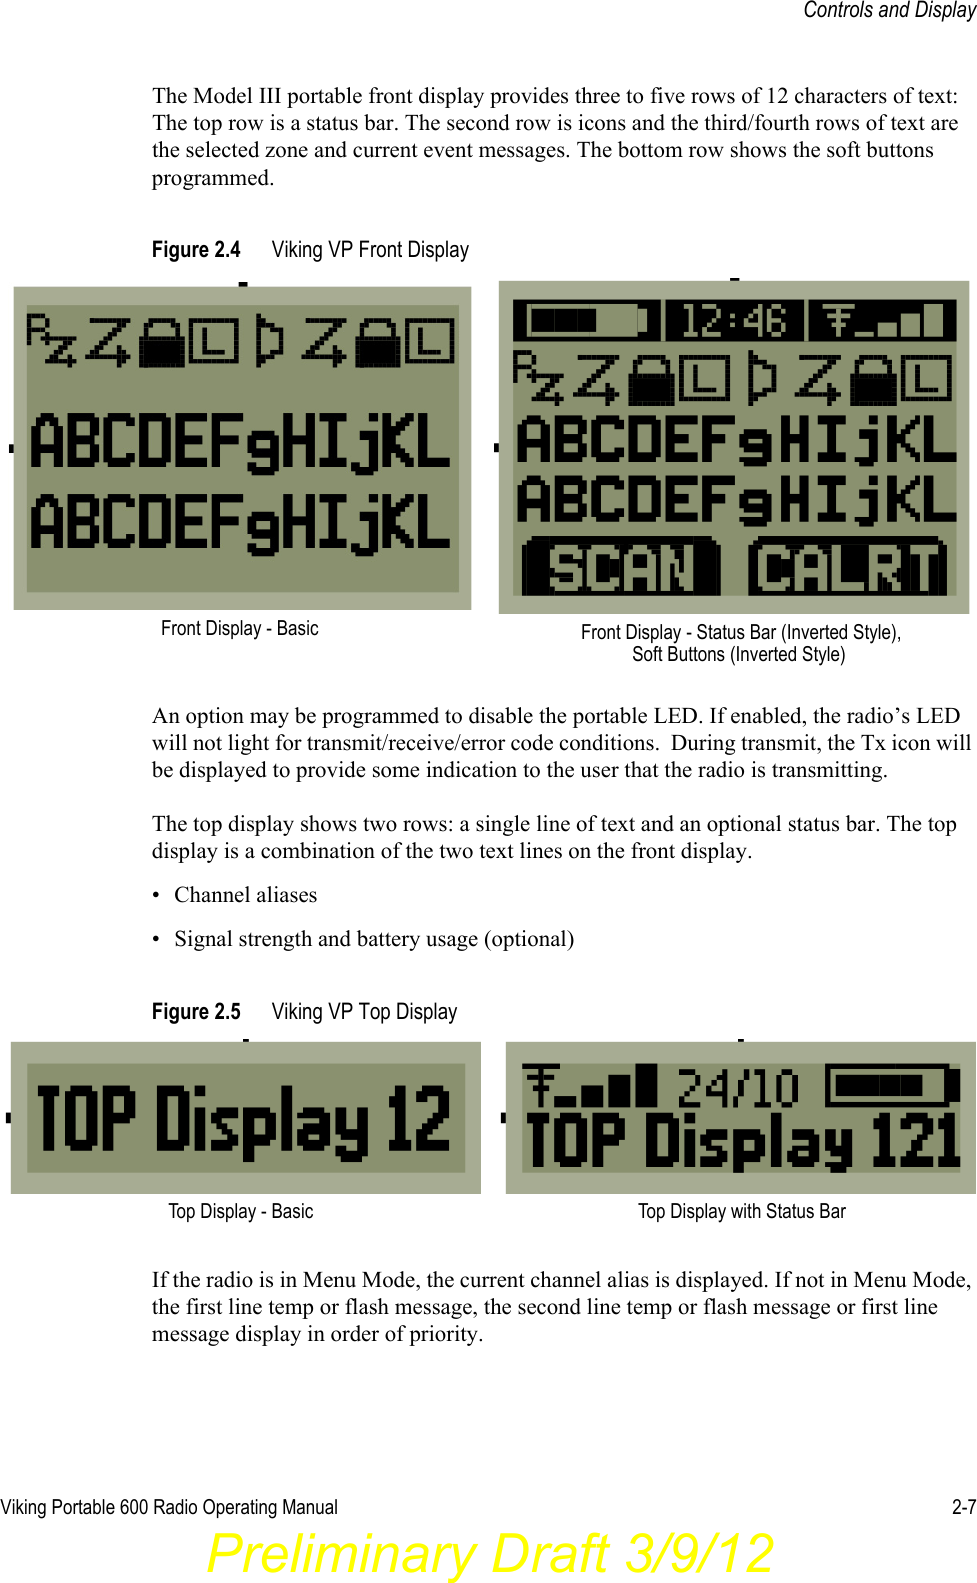 Viking Portable 600 Radio Operating Manual 2-7Controls and DisplayThe Model III portable front display provides three to five rows of 12 characters of text: The top row is a status bar. The second row is icons and the third/fourth rows of text are the selected zone and current event messages. The bottom row shows the soft buttons programmed.Figure 2.4 Viking VP Front DisplayAn option may be programmed to disable the portable LED. If enabled, the radio’s LED will not light for transmit/receive/error code conditions.  During transmit, the Tx icon will be displayed to provide some indication to the user that the radio is transmitting.The top display shows two rows: a single line of text and an optional status bar. The top display is a combination of the two text lines on the front display.• Channel aliases• Signal strength and battery usage (optional)Figure 2.5 Viking VP Top Display If the radio is in Menu Mode, the current channel alias is displayed. If not in Menu Mode, the first line temp or flash message, the second line temp or flash message or first line message display in order of priority.Front Display - Basic Front Display - Status Bar (Inverted Style), Soft Buttons (Inverted Style)Top Display - Basic Top Display with Status BarPreliminary Draft 3/9/12